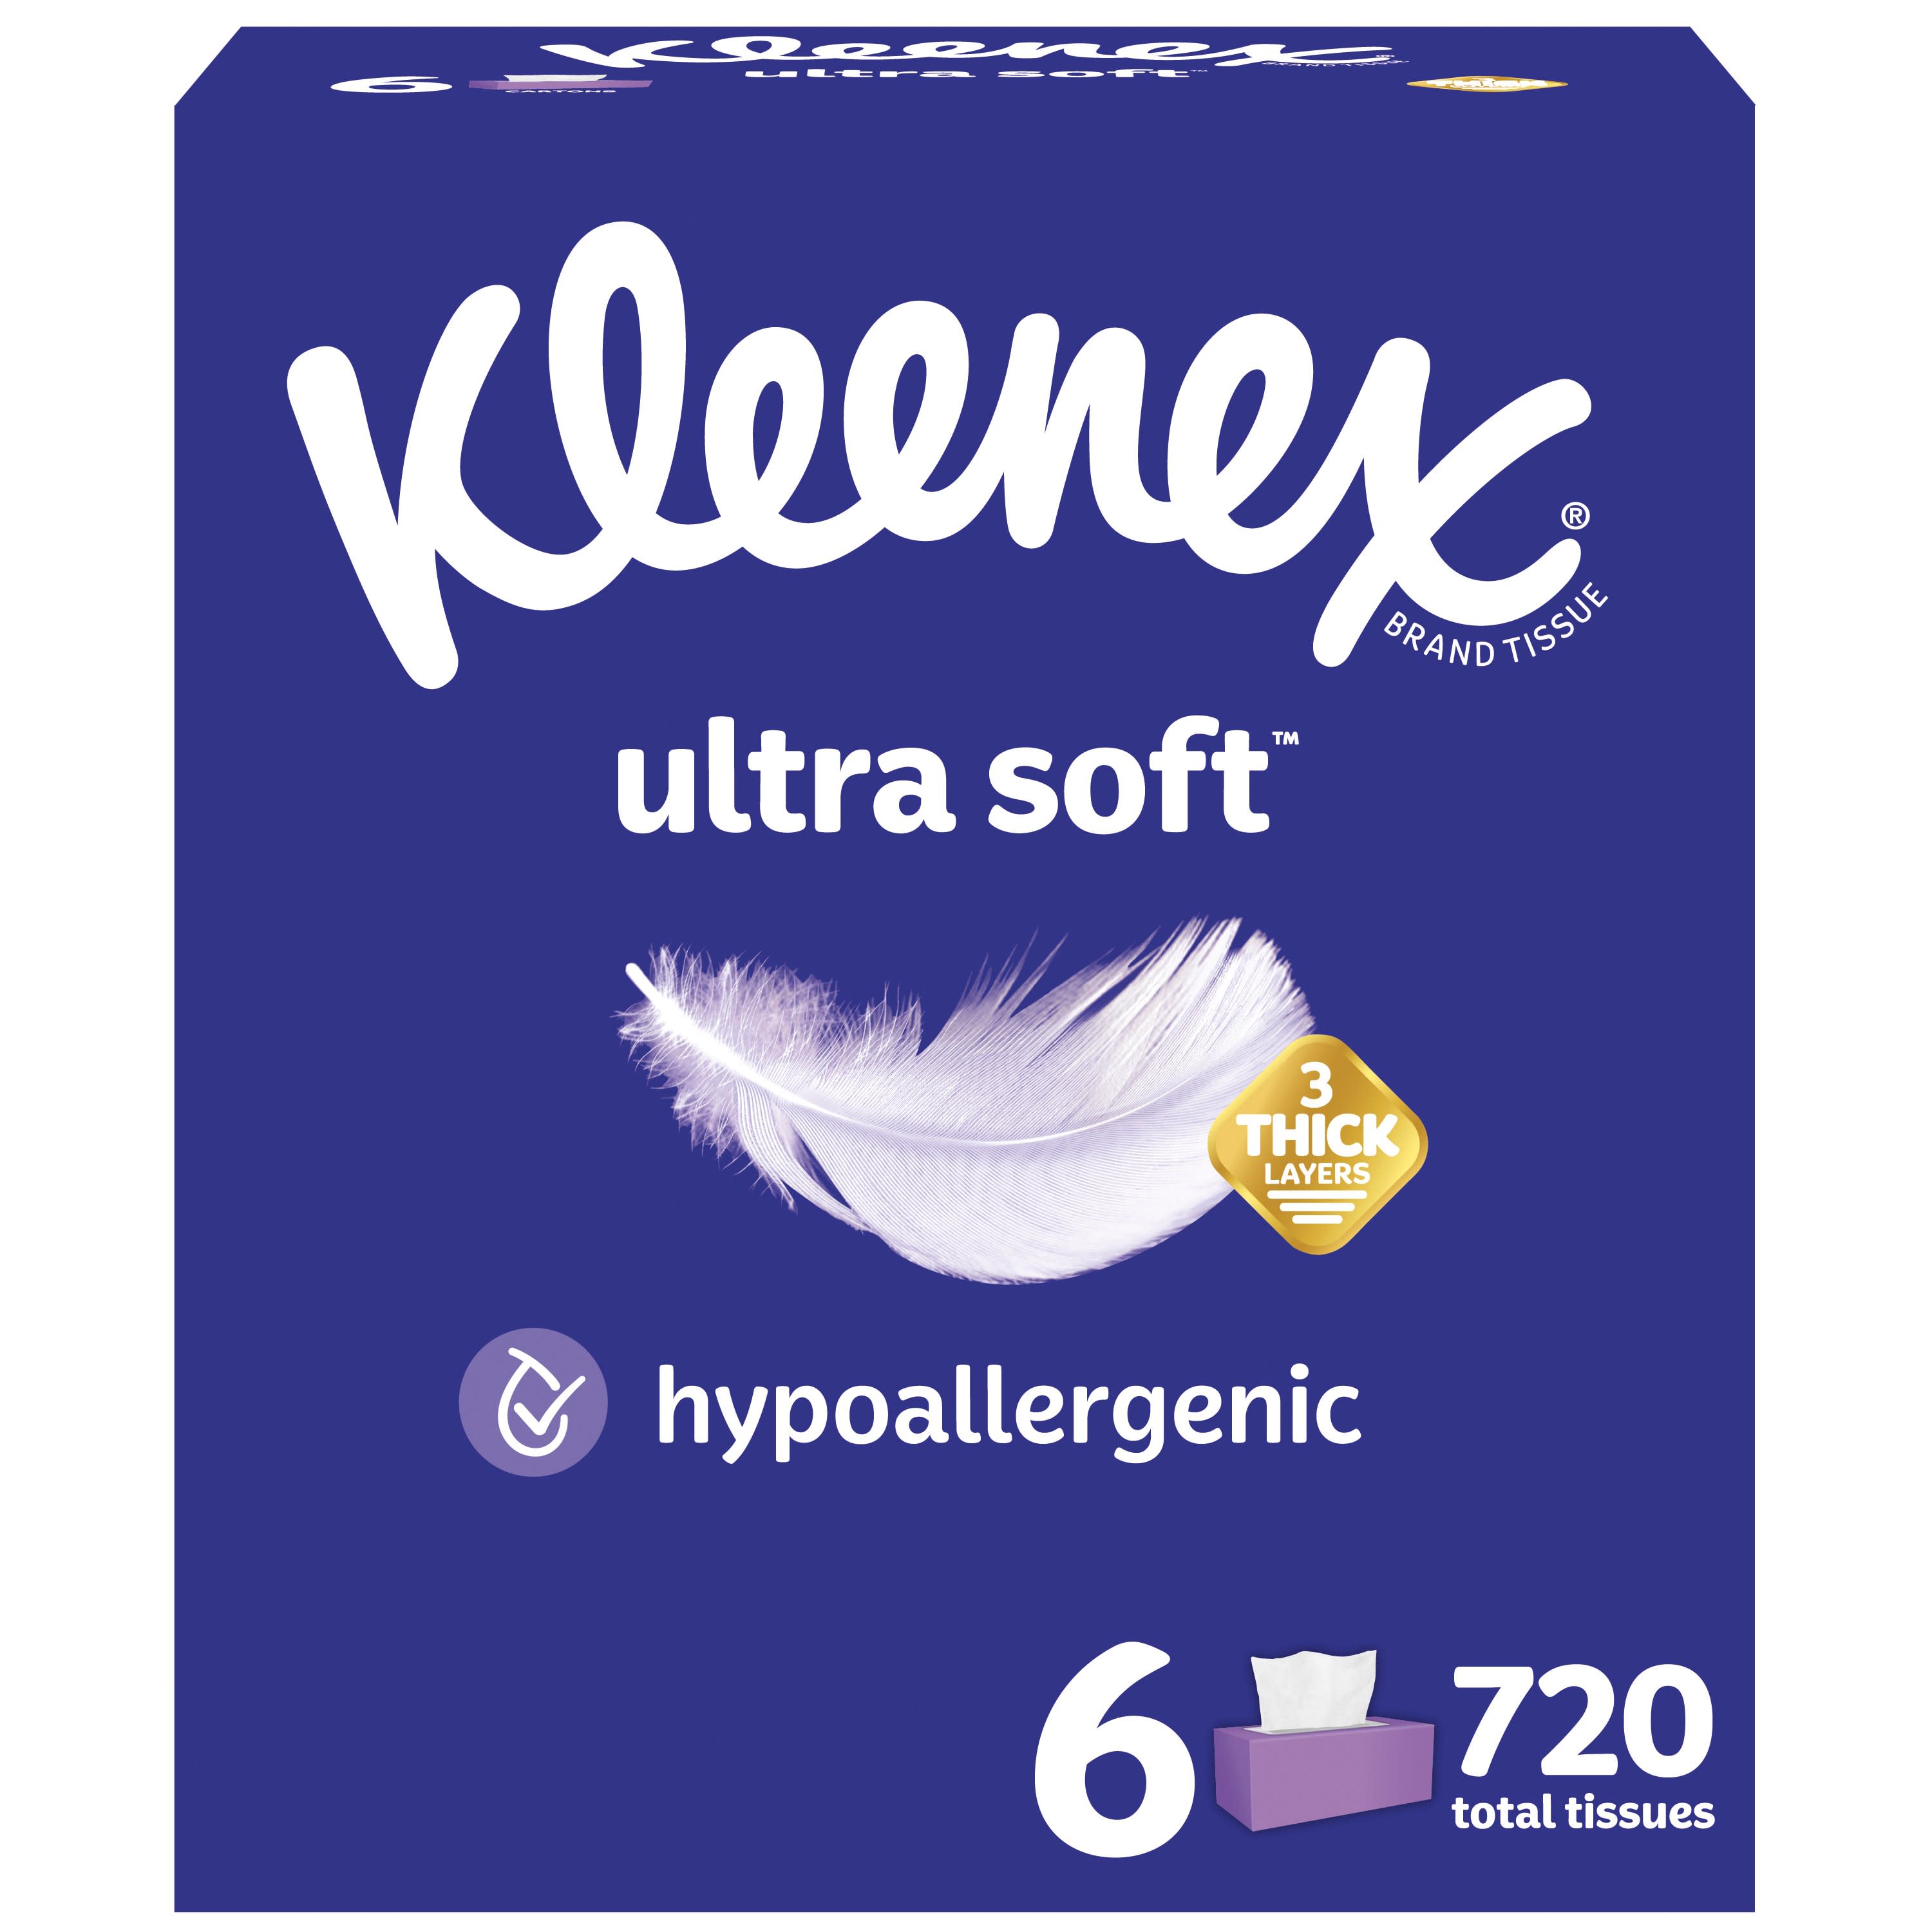 Kleenex Ultra Soft Facial Tissues, 6 Flat Boxes - image 1 of 12